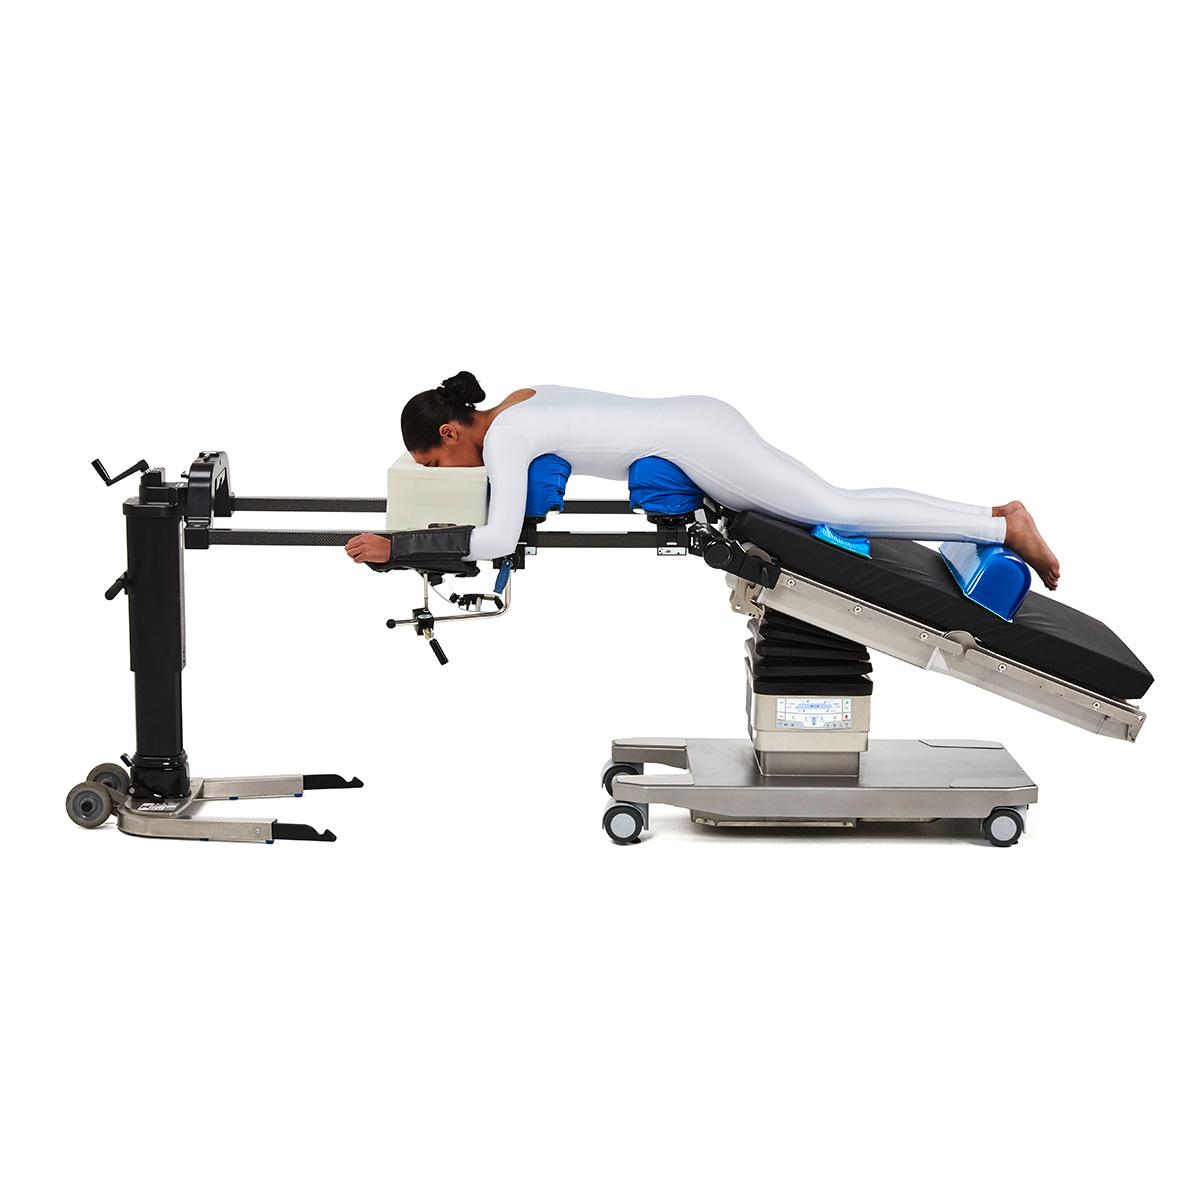 Patient in the prone position on Hillrom surgical table equipped with Universal Spine Frame accessories.